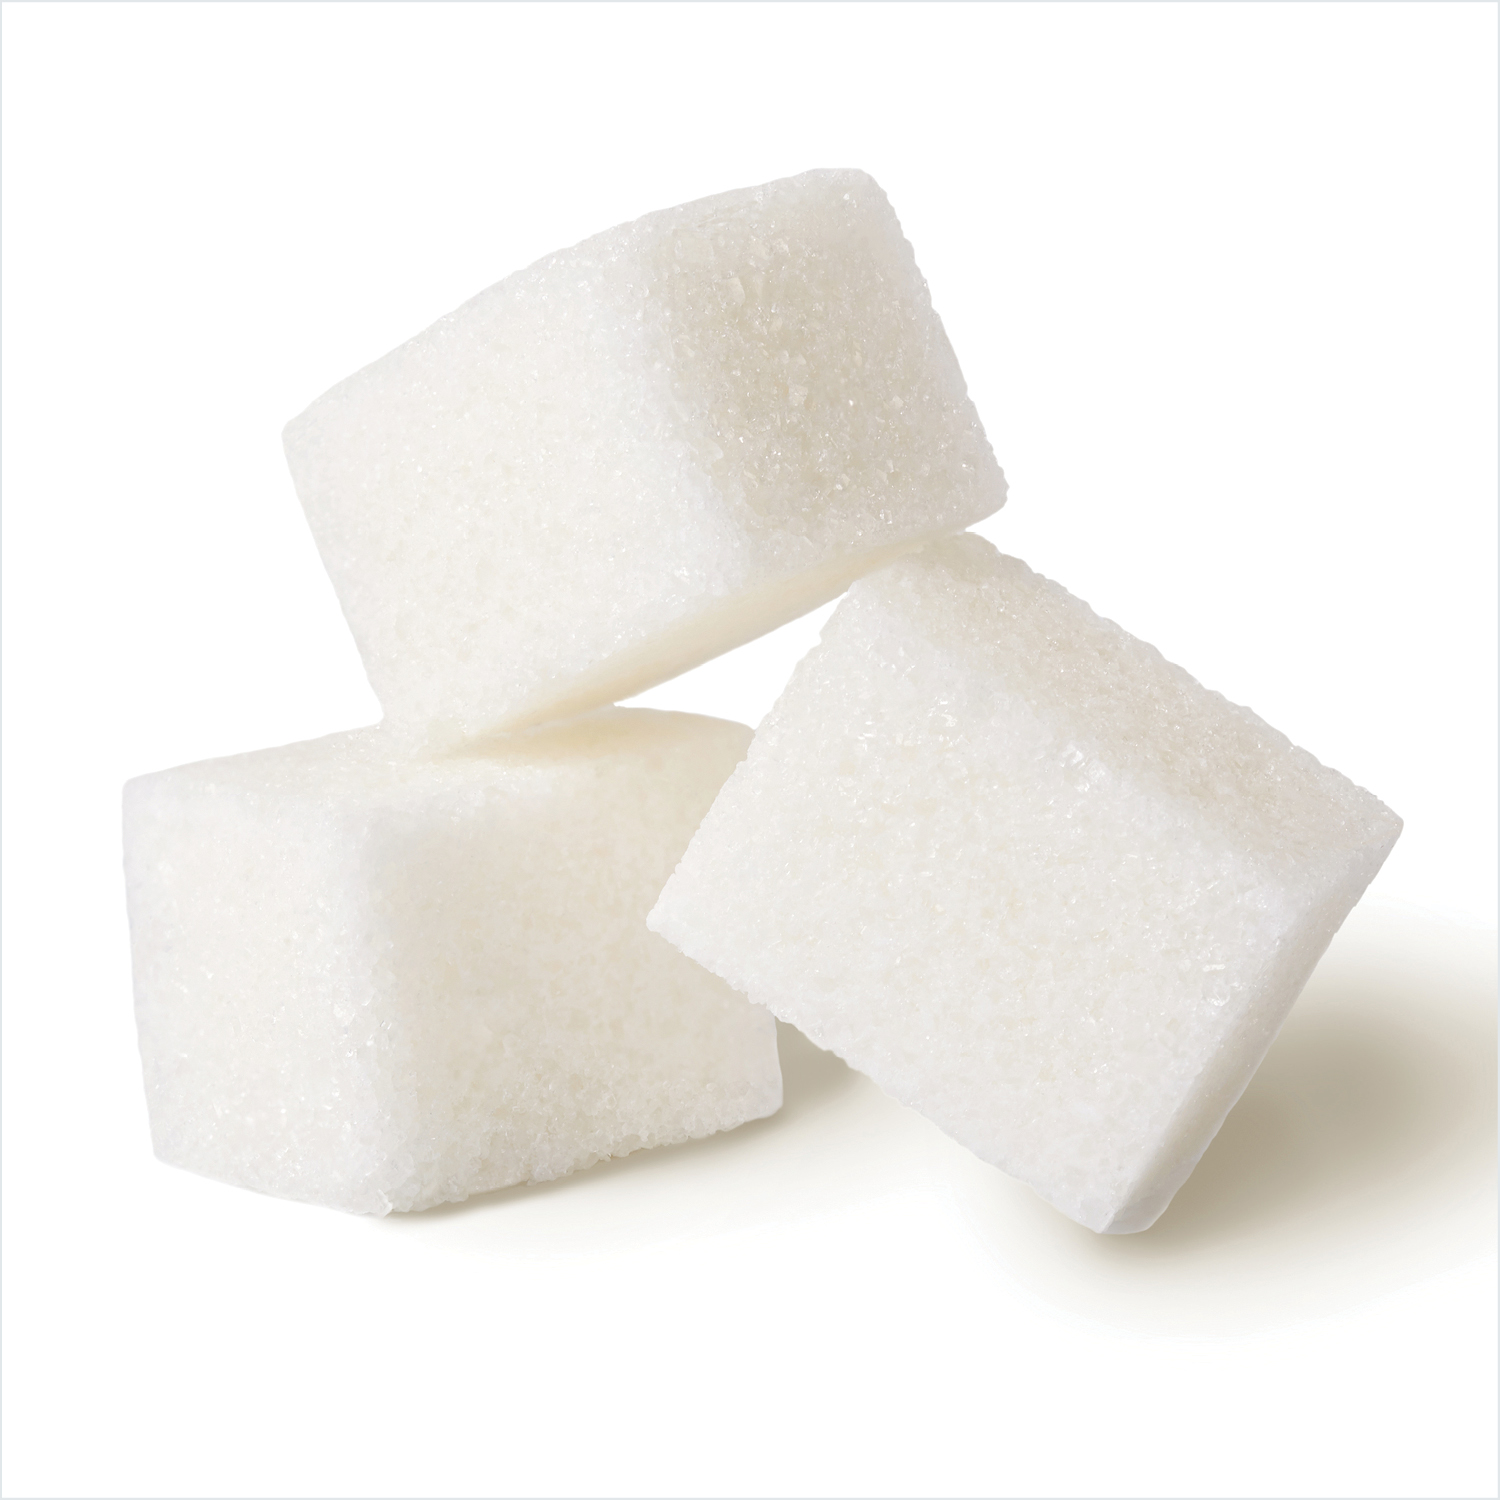 Sweeteners - The good the bad and the unhealthy